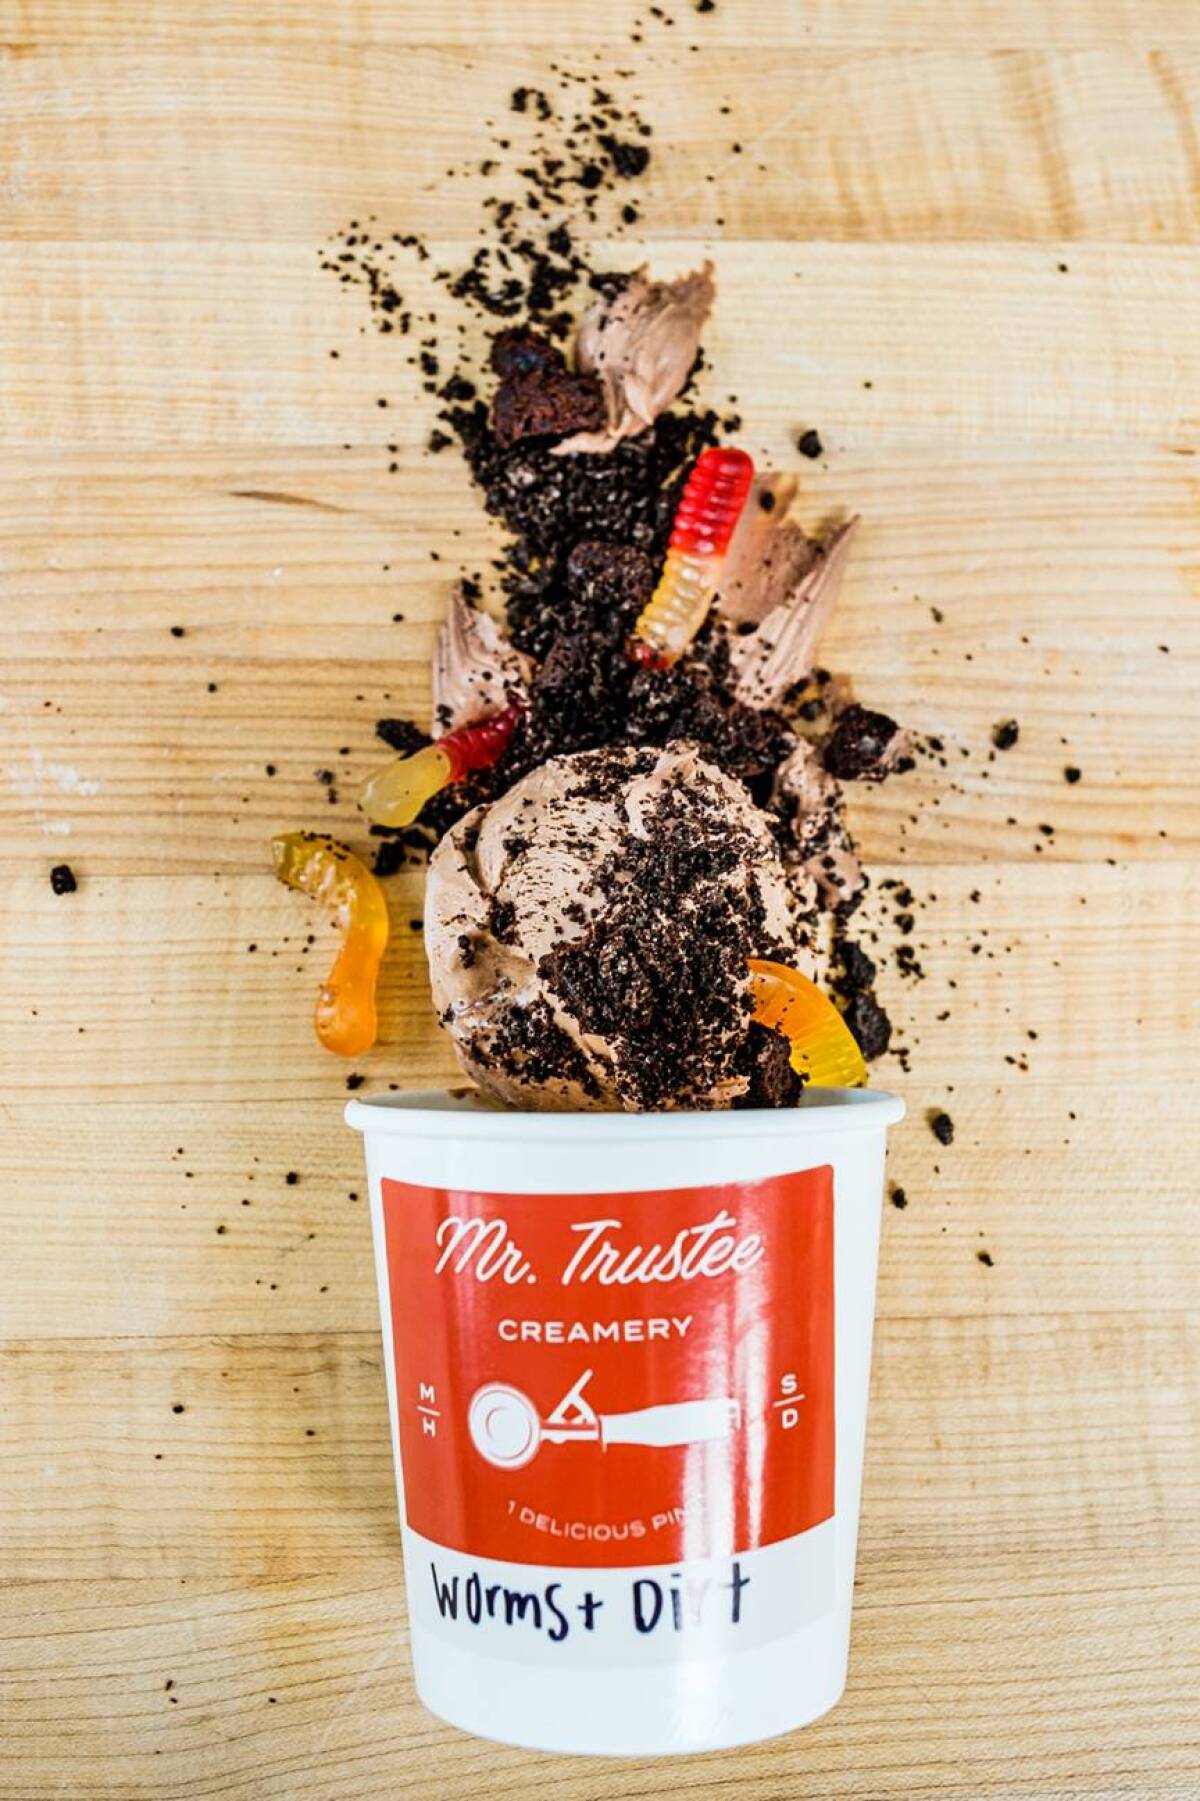 Worms & Dirt Ice Cream from Mr. Trustee's Creamery in Mission Hills